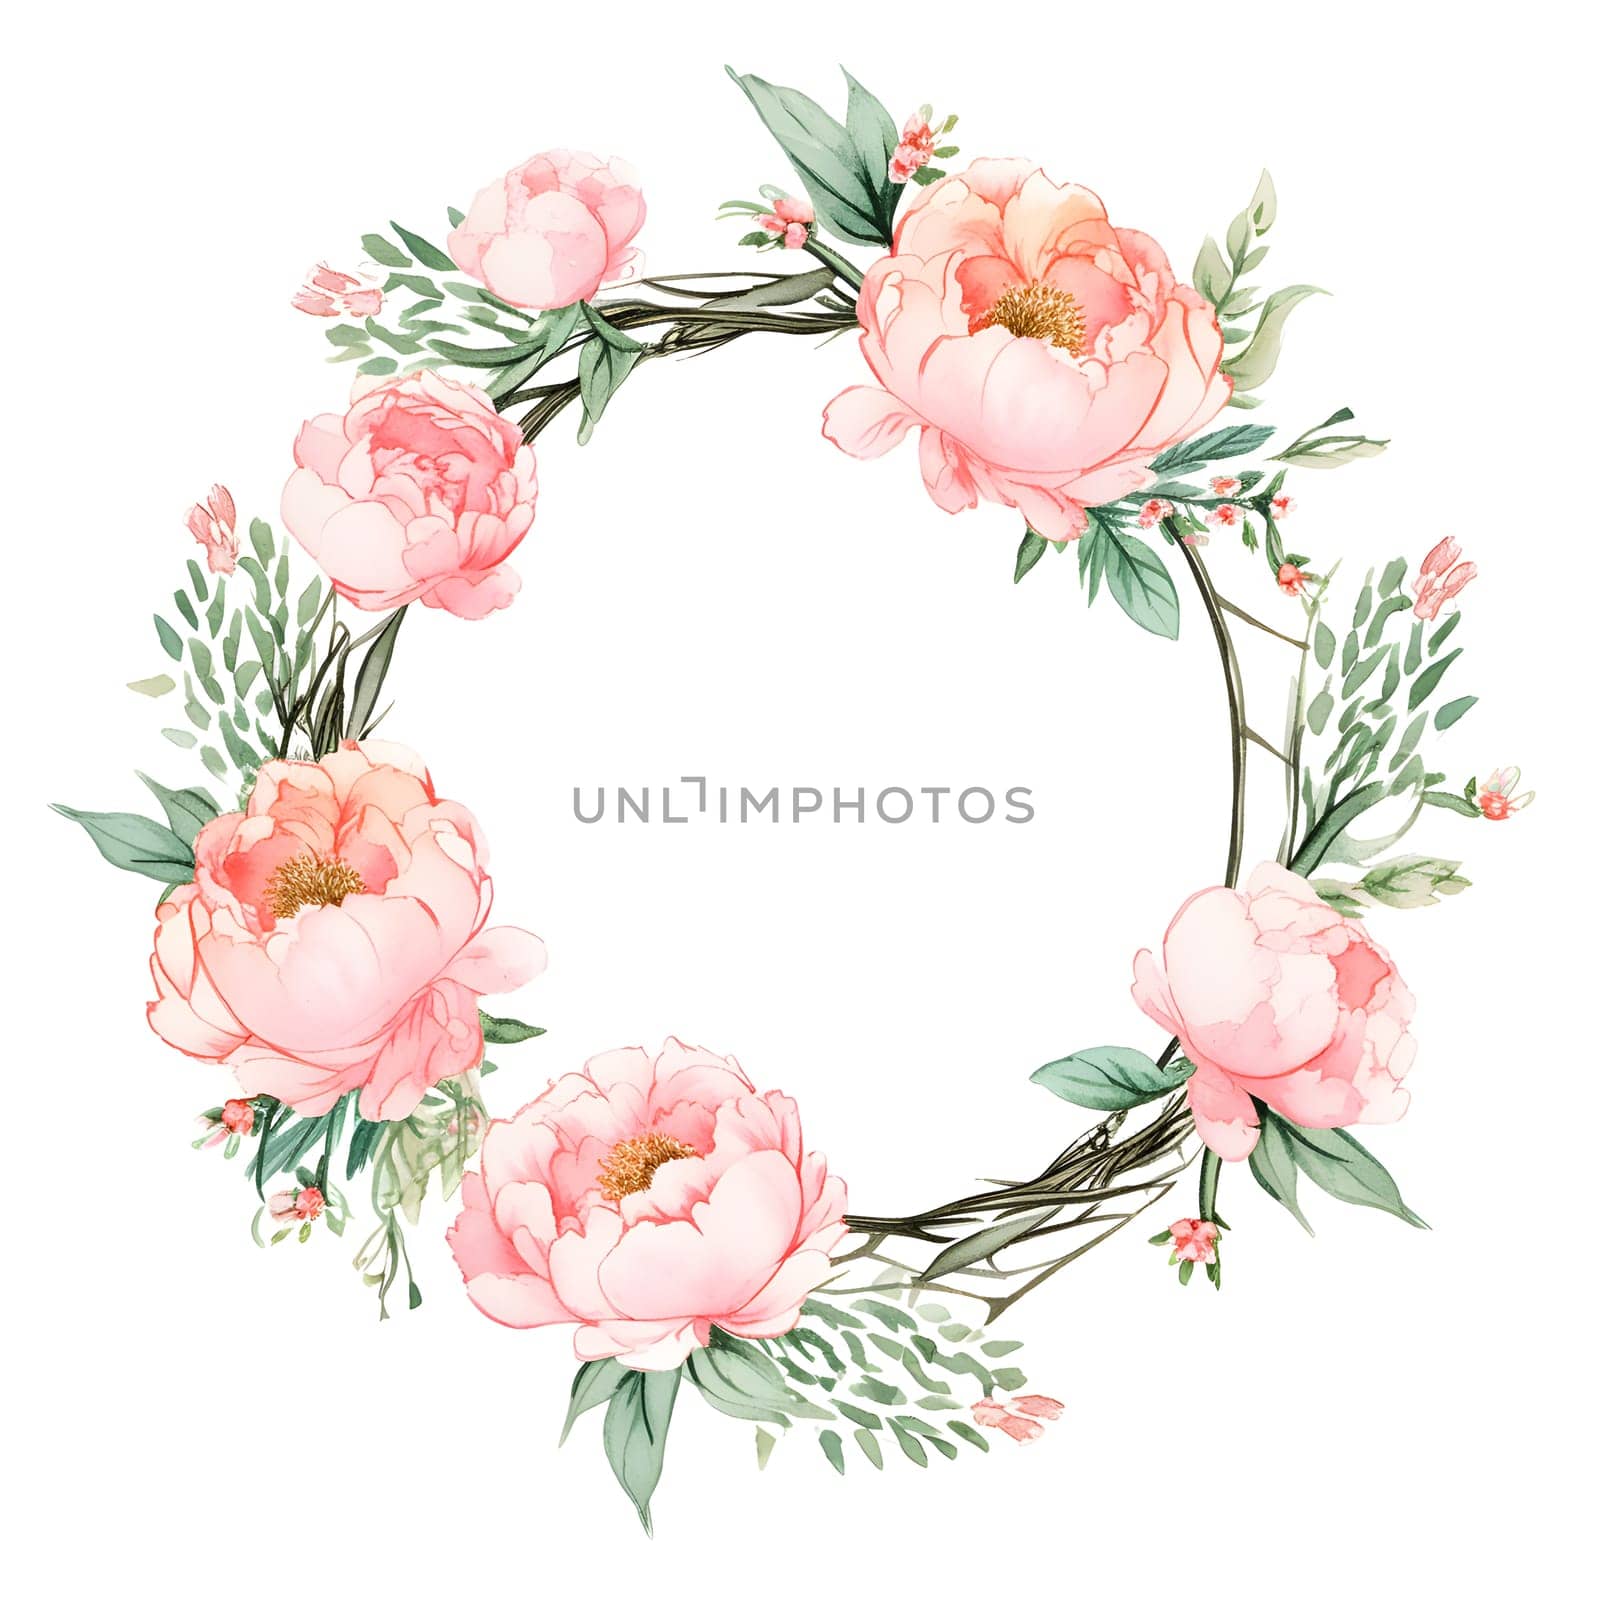 Beautiful wreath of pink flowers and green leaves on a white background by Nadtochiy